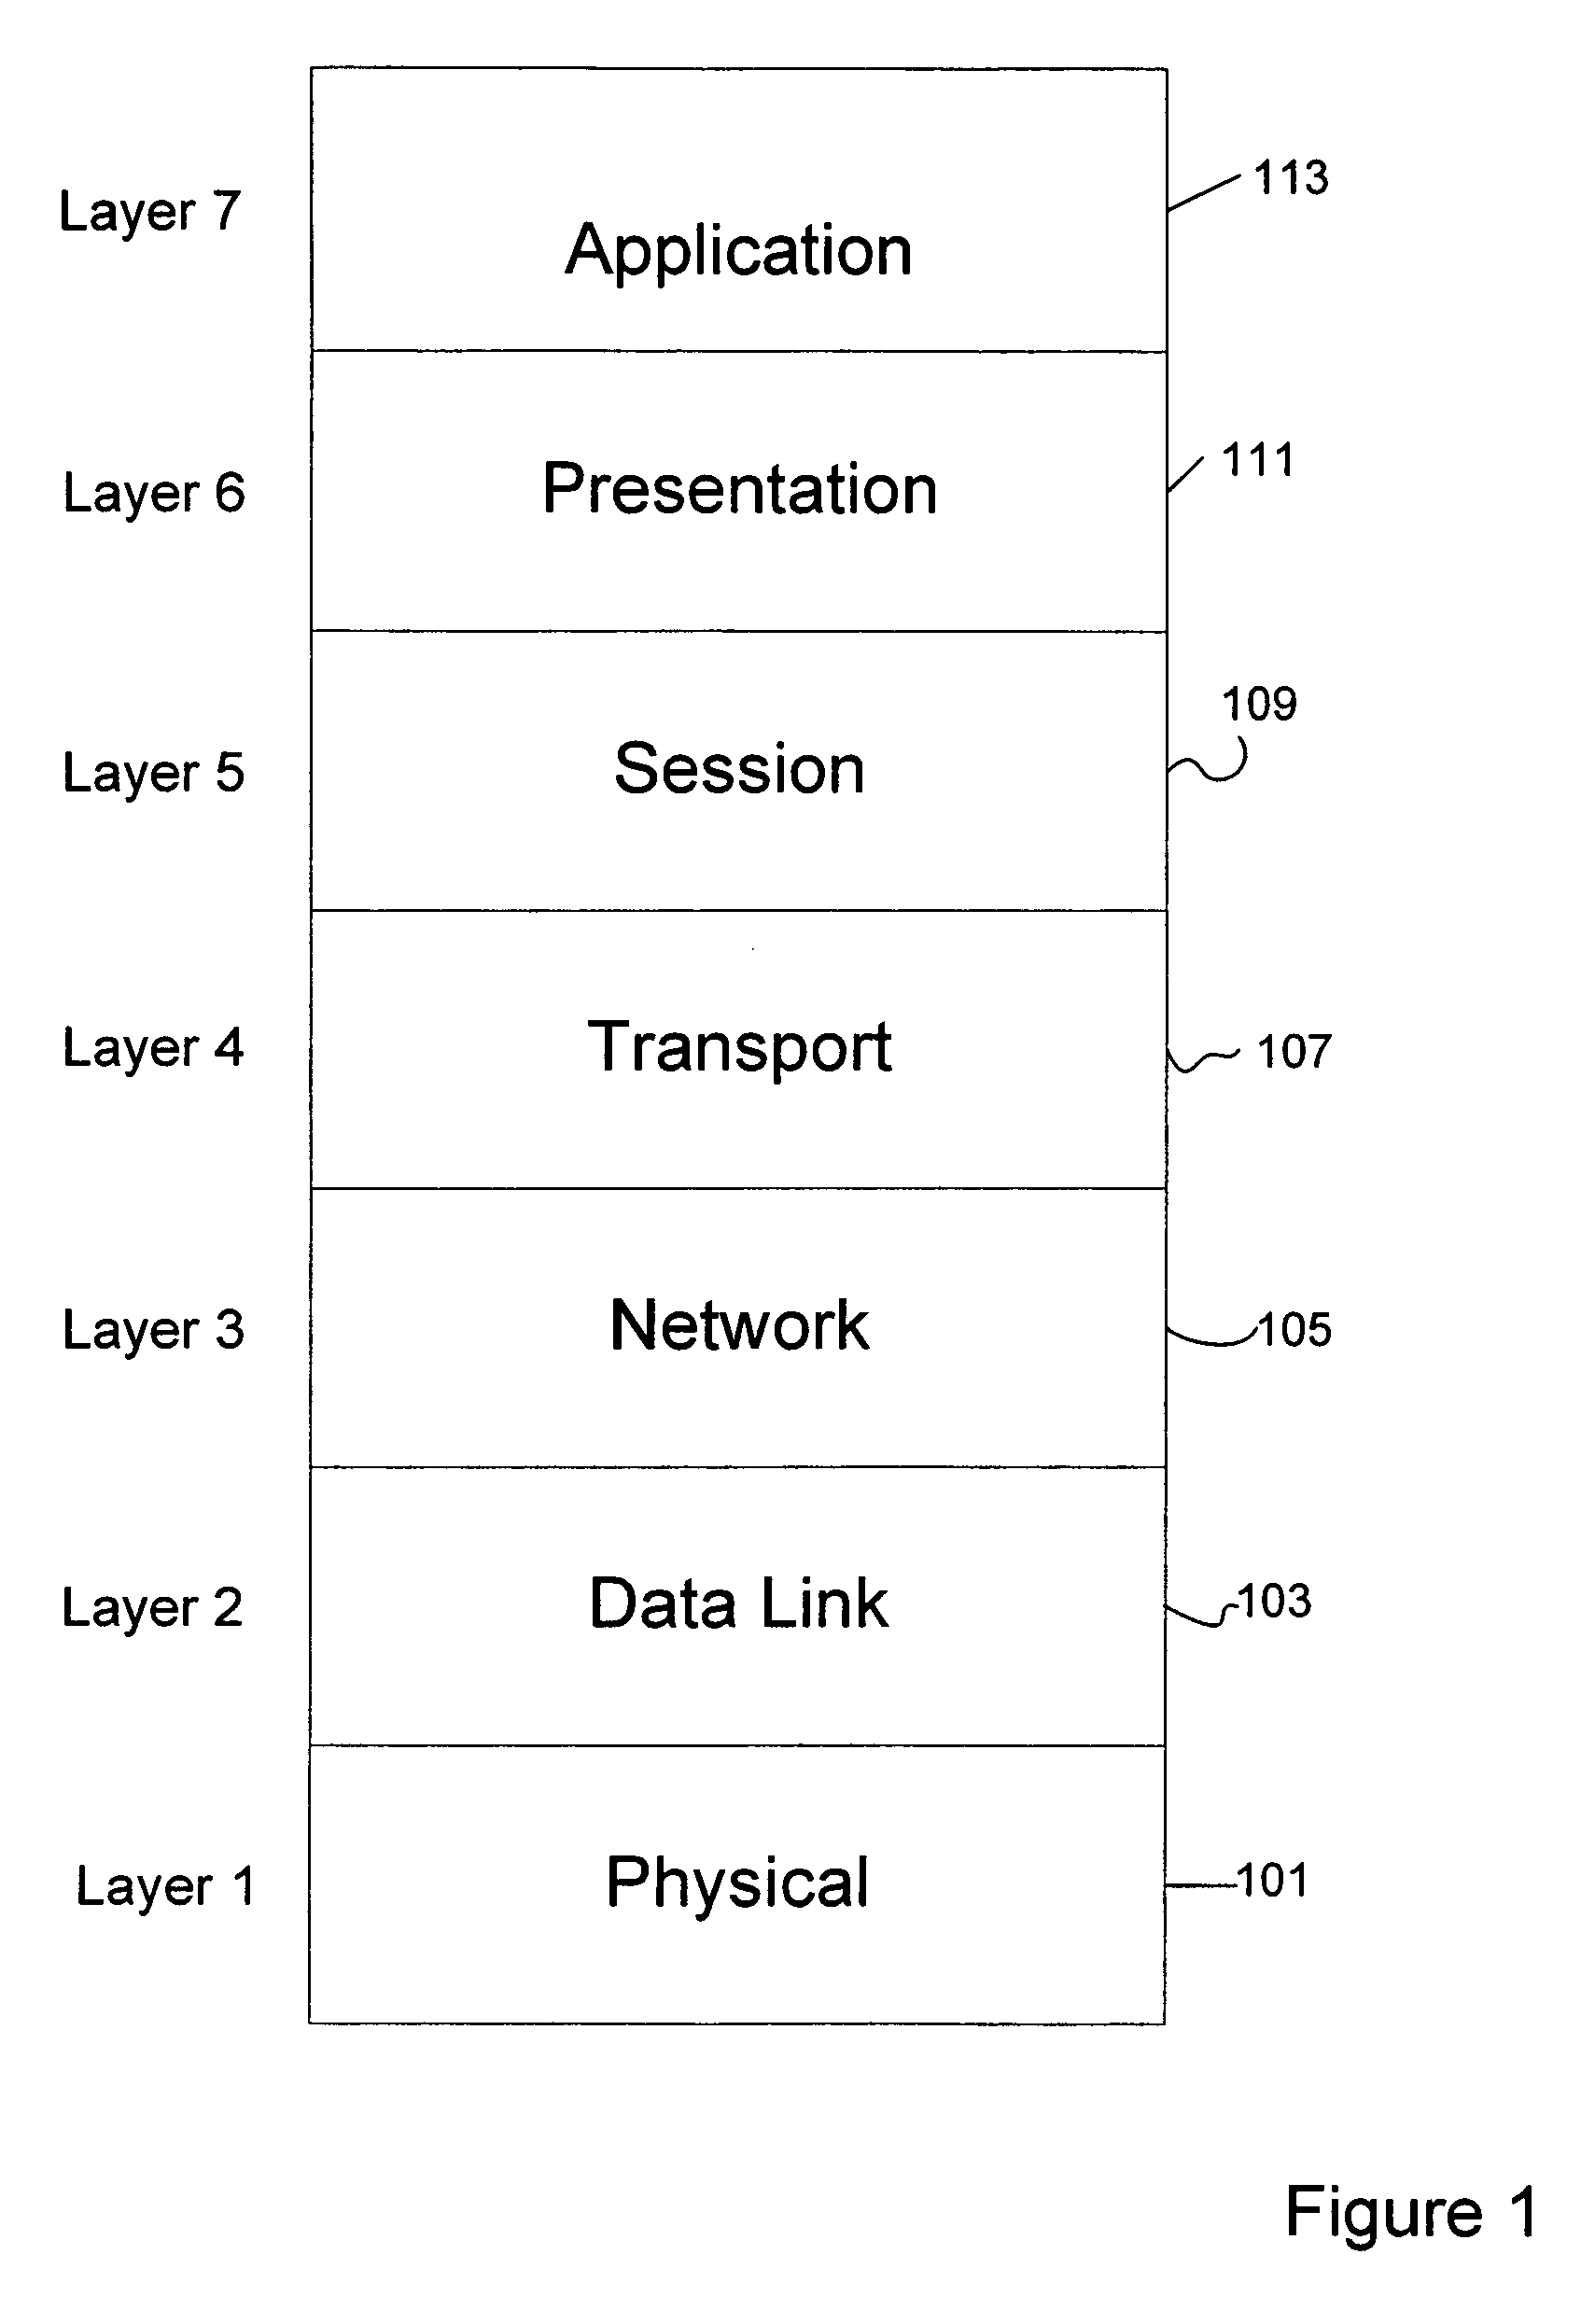 Managing access to a network